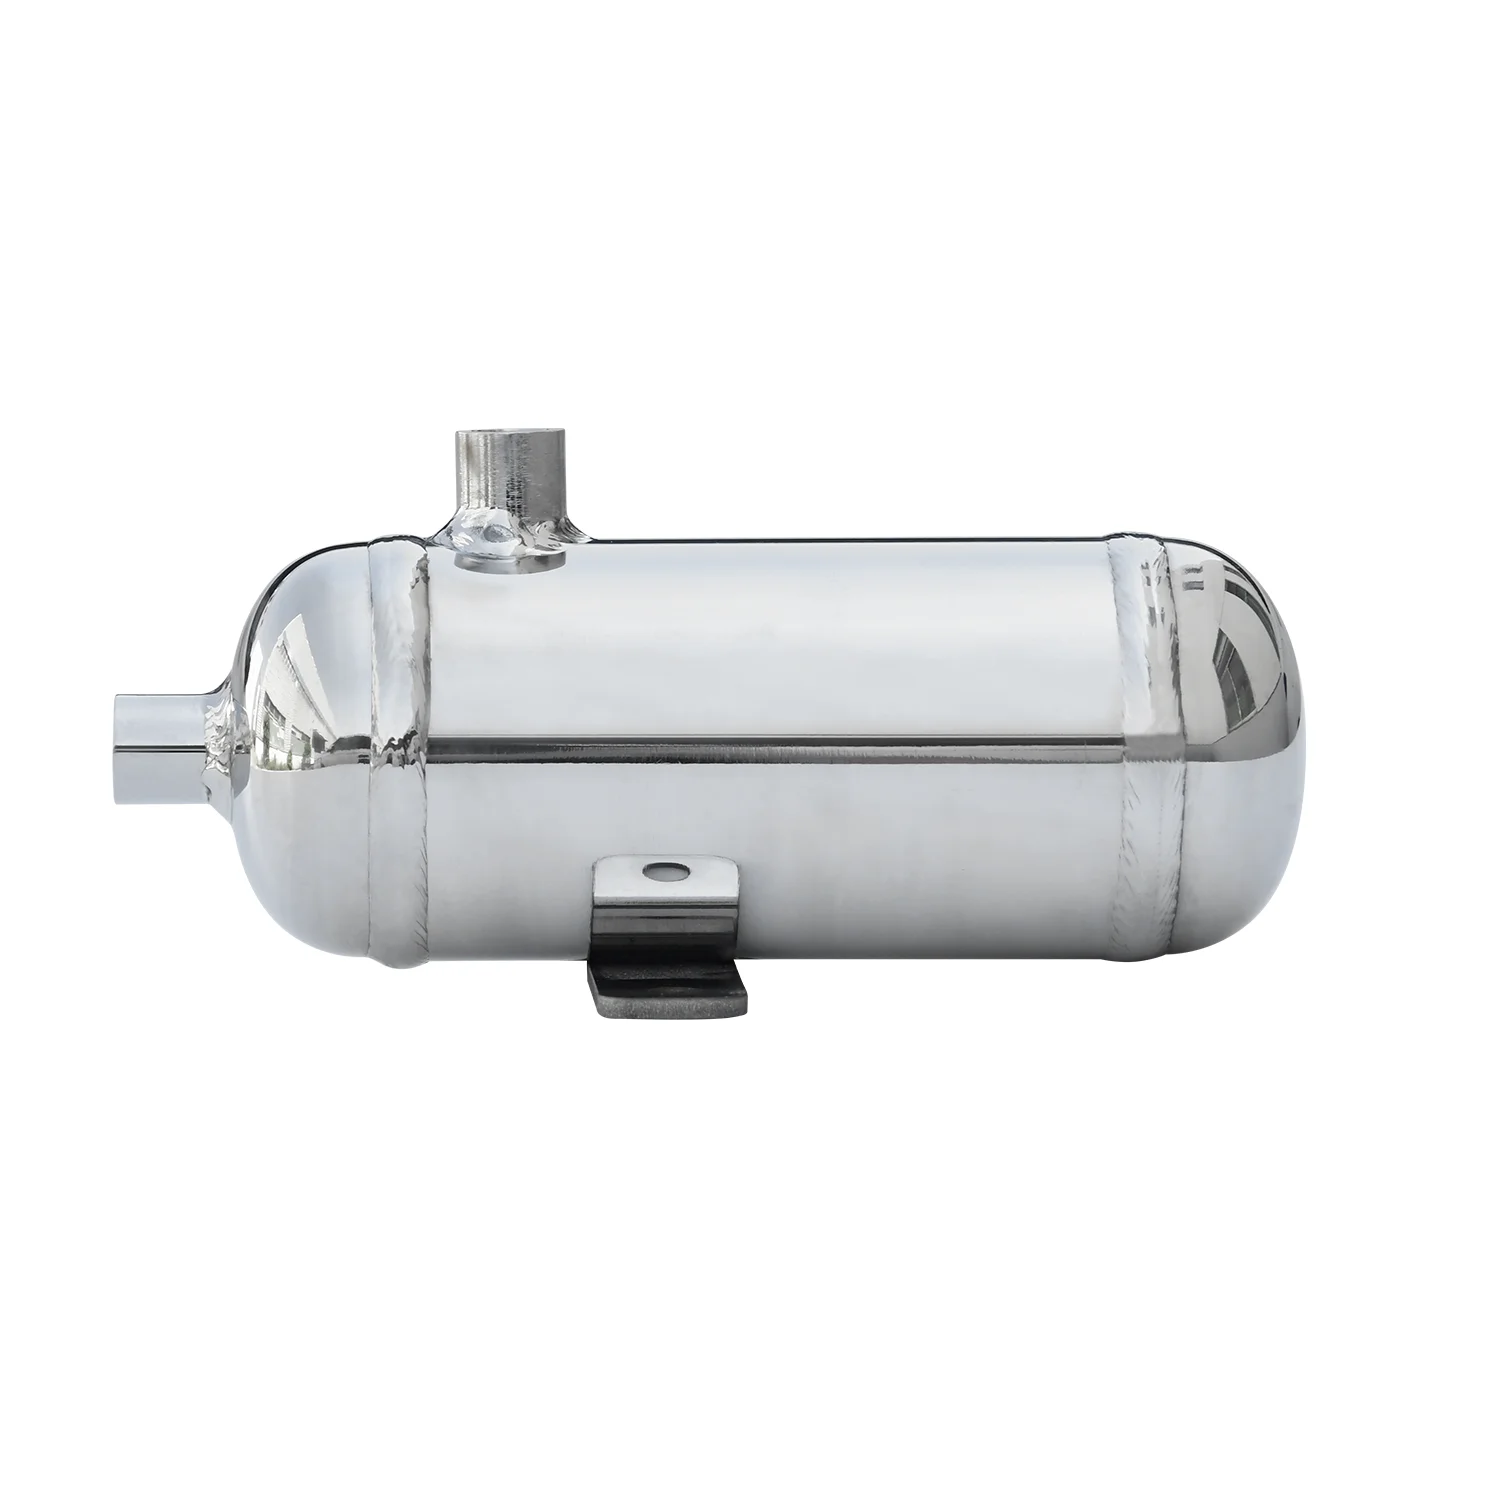 https://ae01.alicdn.com/kf/Sa99c0c051bb248b191c4612aa1f52e3fU/0-3L-304-Stainless-Steel-Small-Horizontal-Air-Compression-Tank-Vacuum-Buffer-Air-Storage-Suitable-for.png